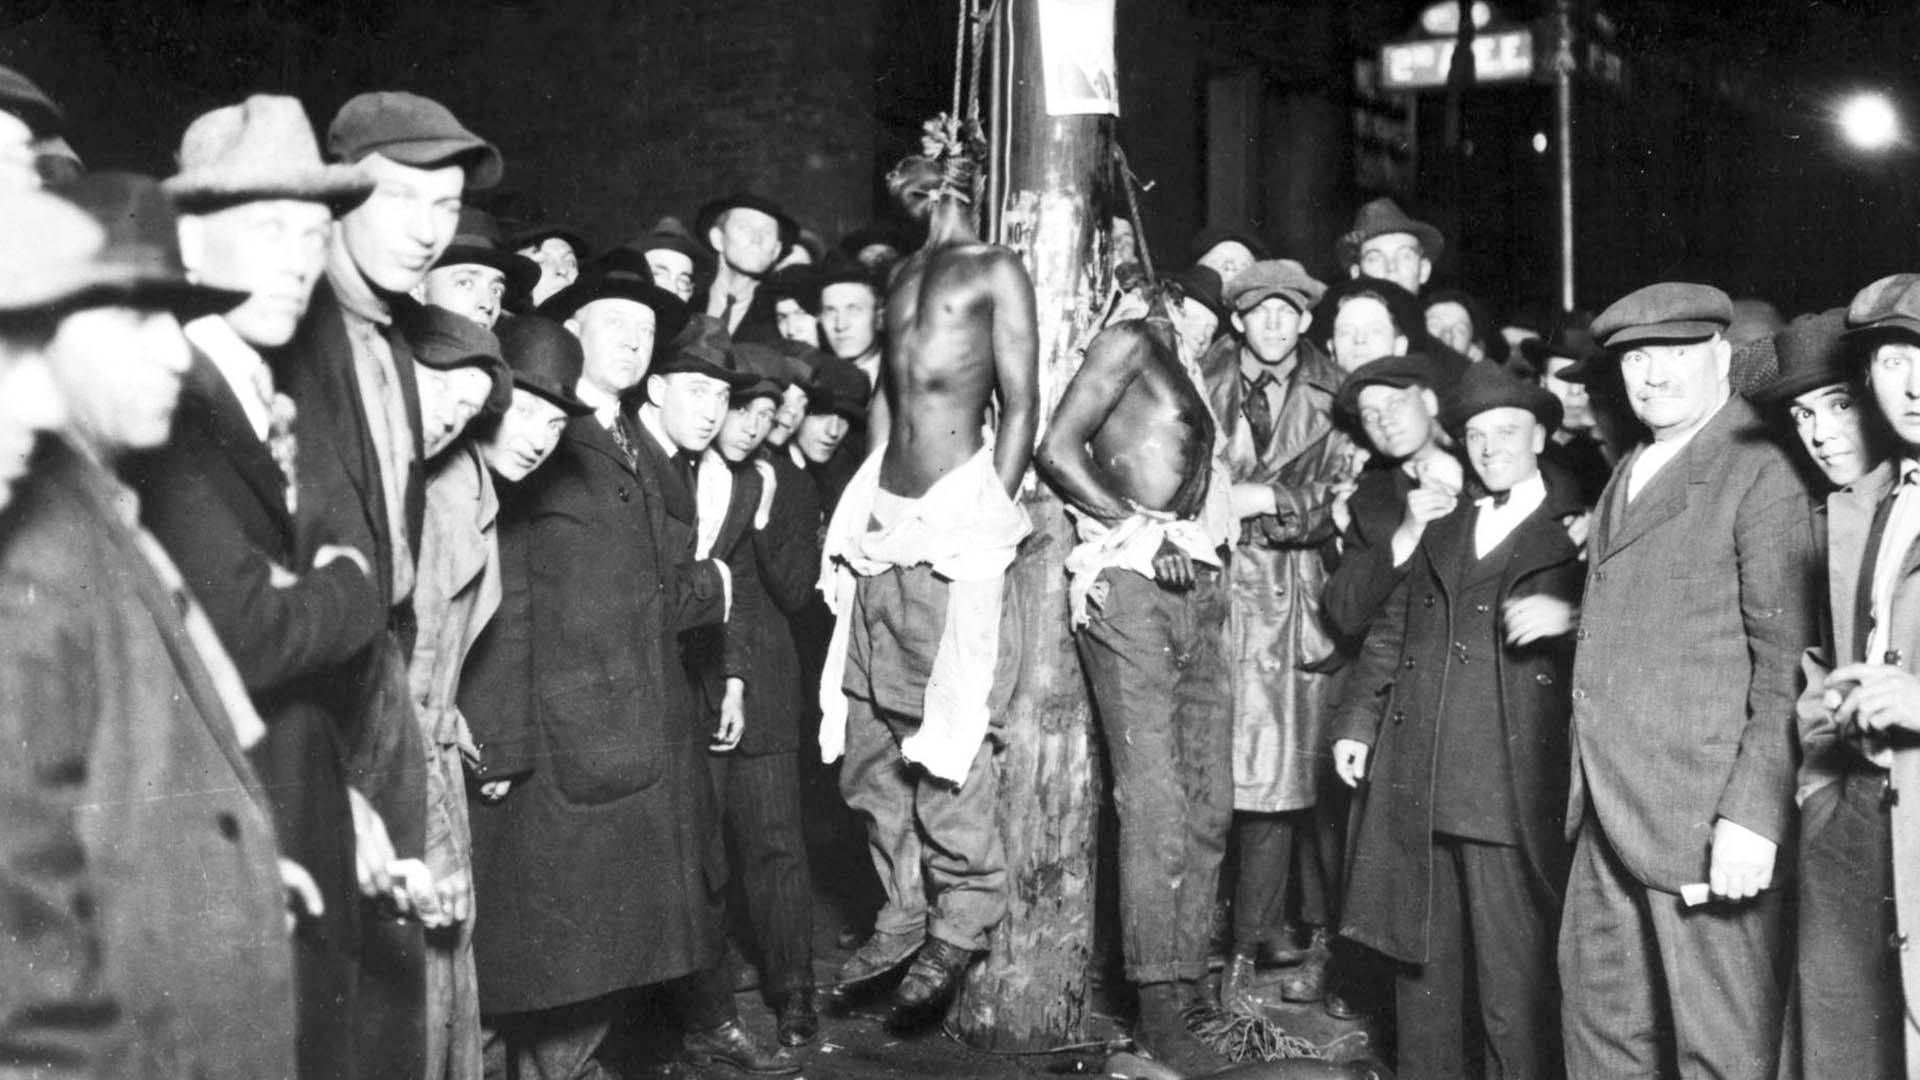 The photo of the 1920 lynching was sold as a postcard.